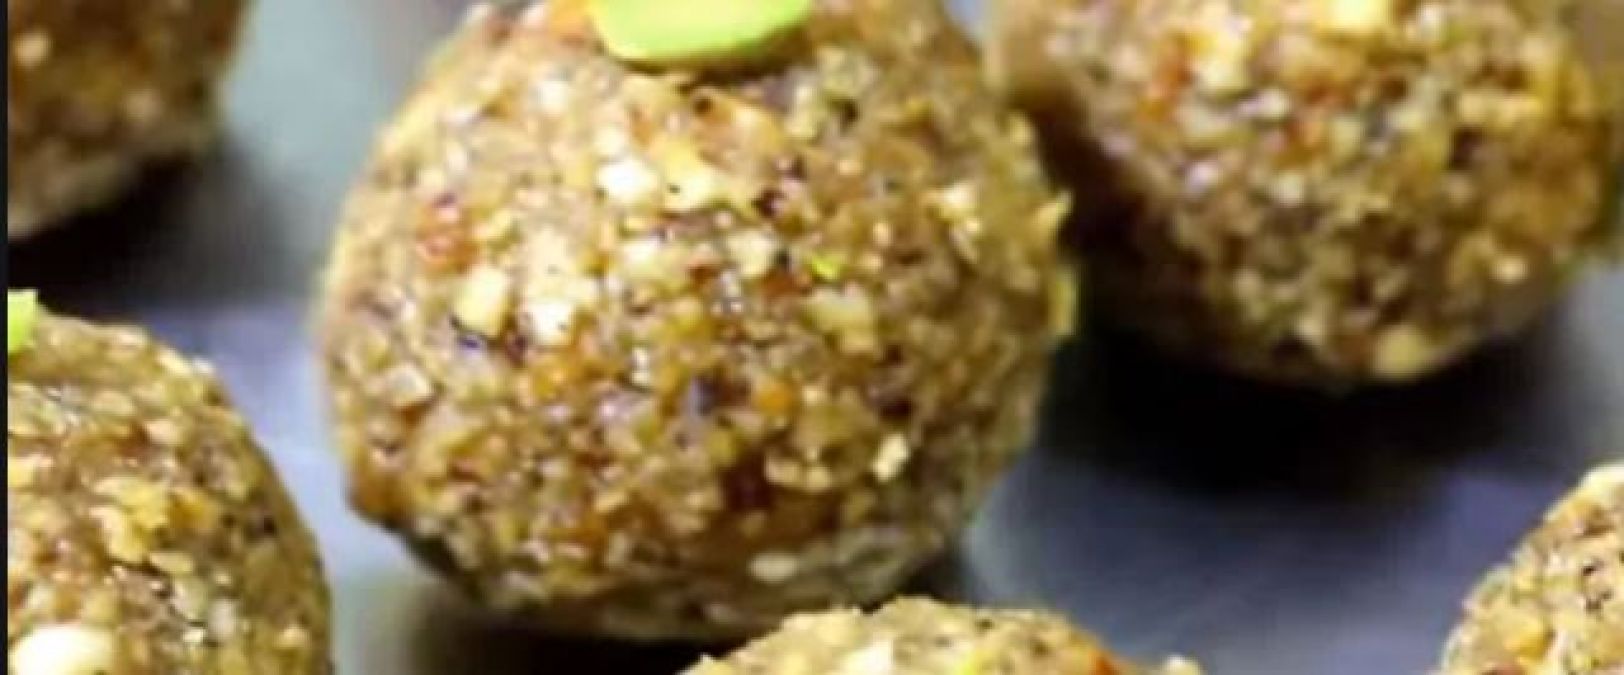 Homemade jaggery and sonth will drive away cold diseases, recipe is very easy